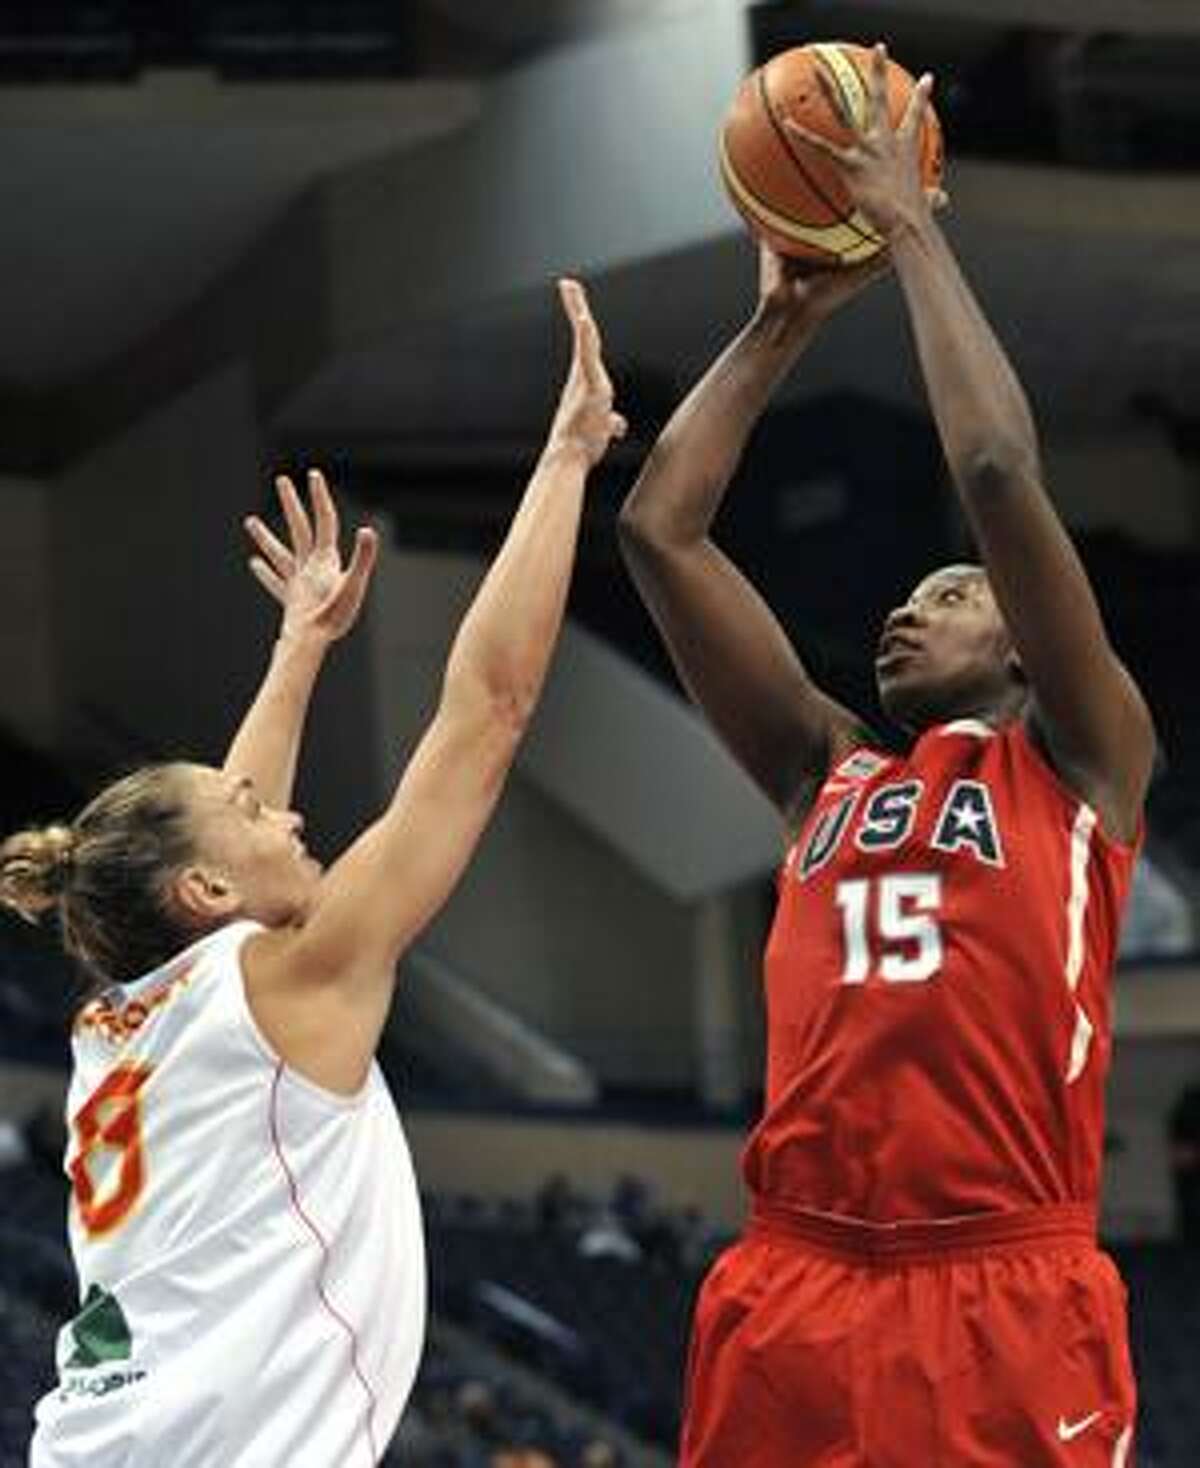 United States' Tina Charles goes up for a shot while guarded by Spain's Lucila Pascua during the second half of an exhibition basketball game in Hartford, Conn., on Sunday, Sept. 12, 2010. (AP Photo/Jessica Hill)